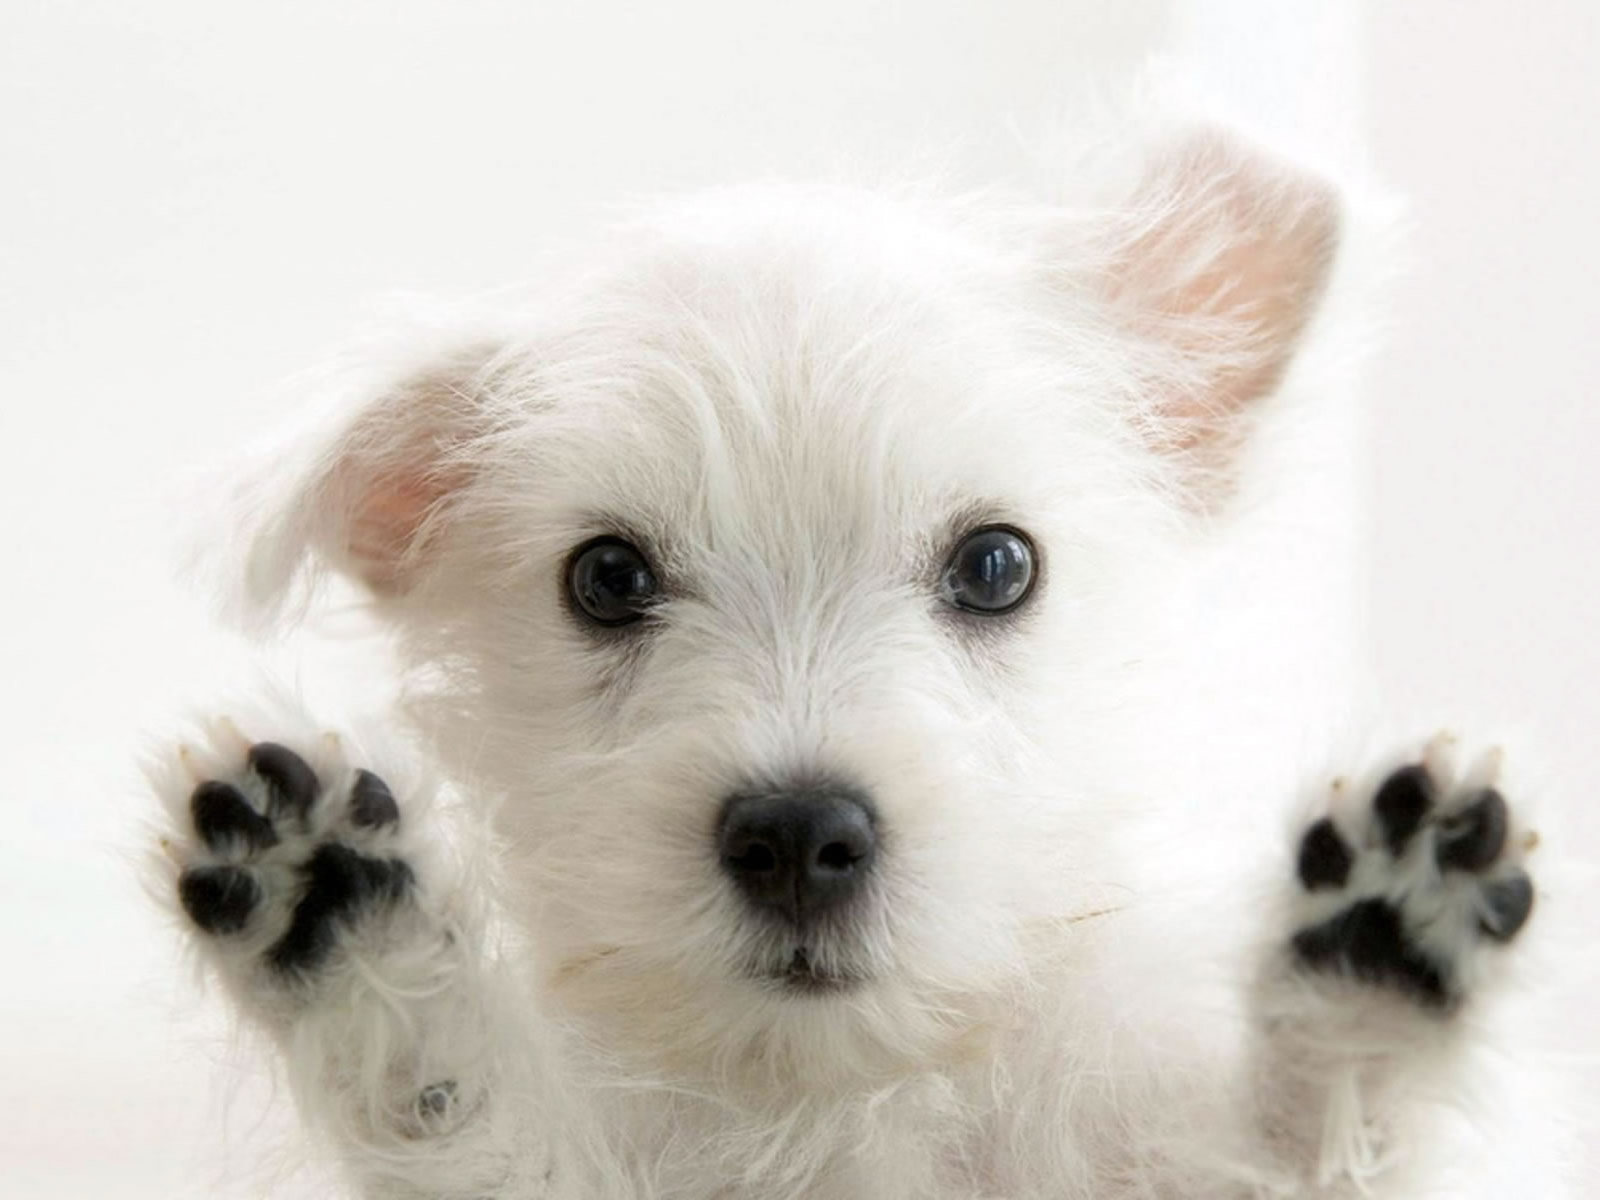 HD WALLPAPERS: Puppy Dog HD Wallpapers Free